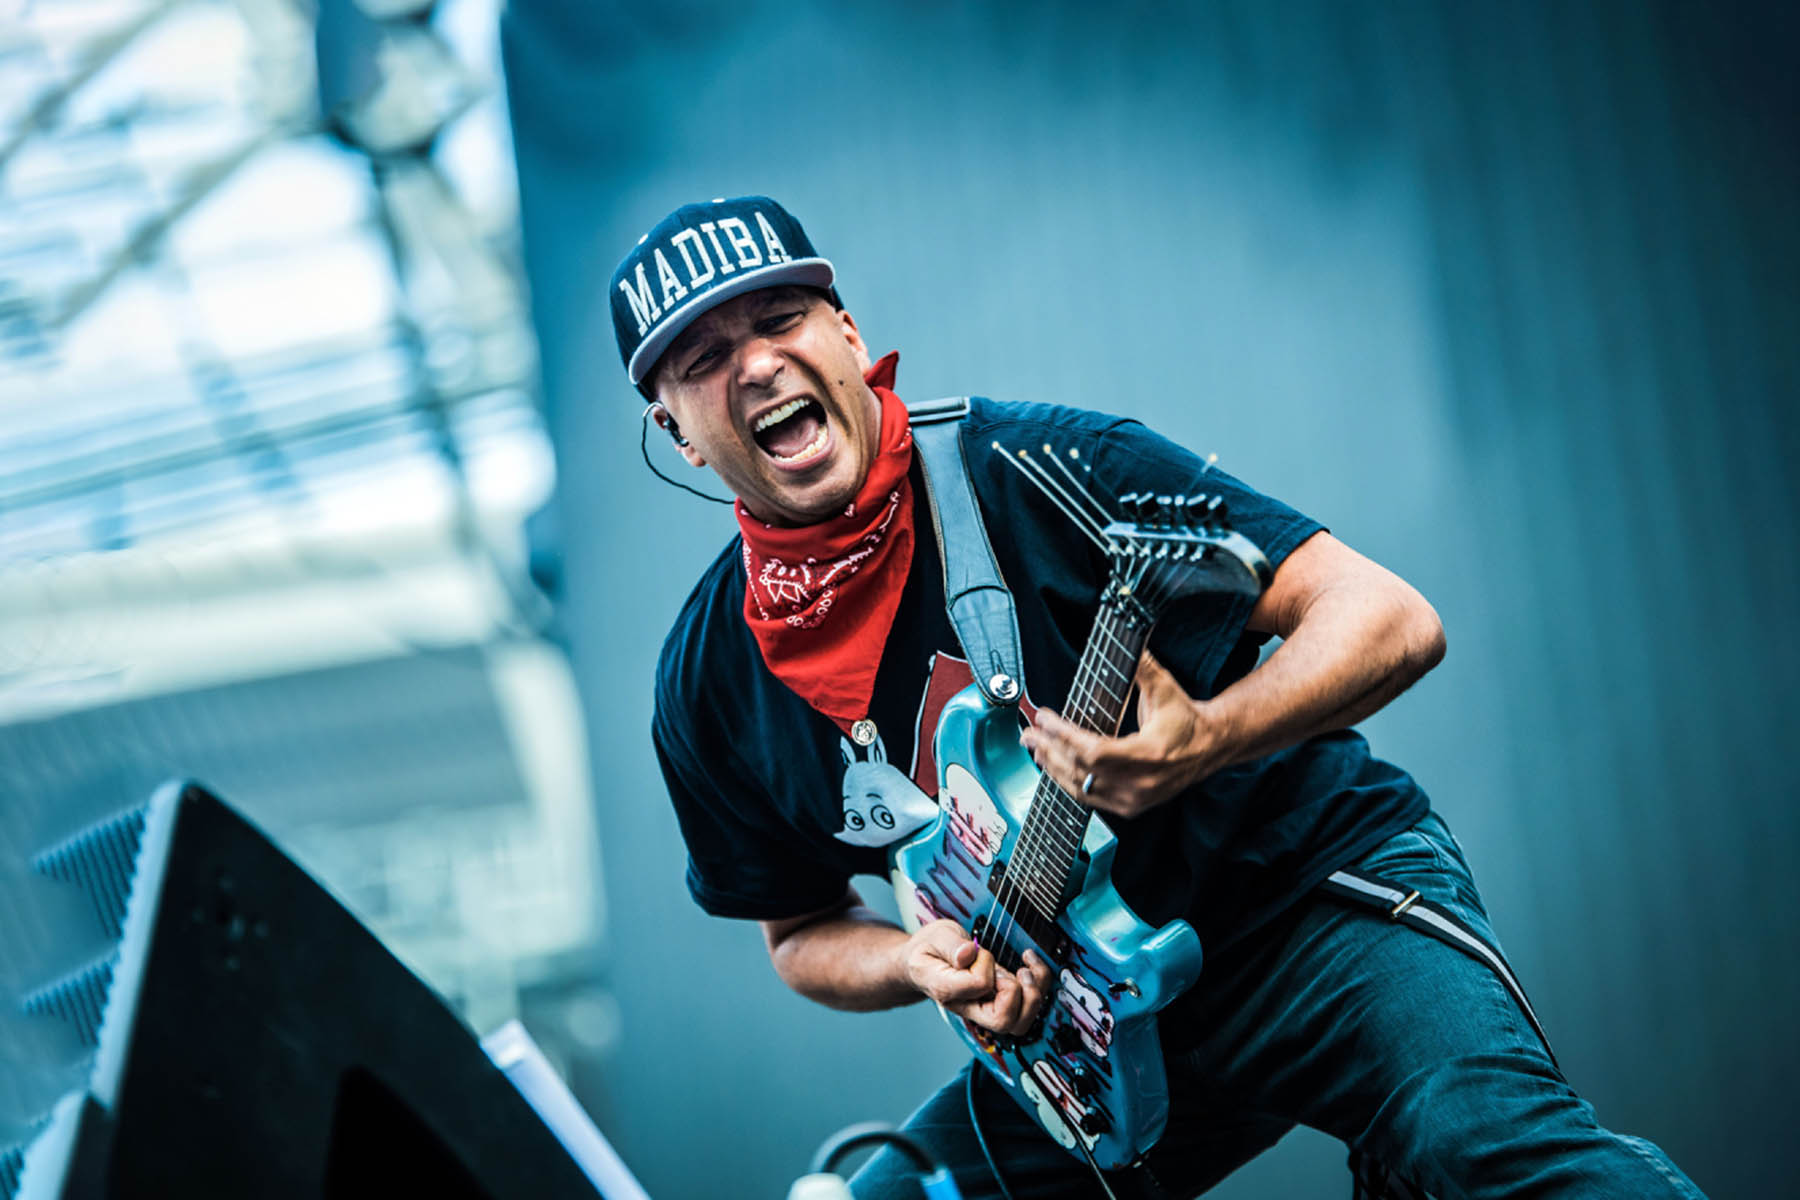 TOM MORELLO And THE BLOODY BEETROOTS Announce “The Catastrophists” EP